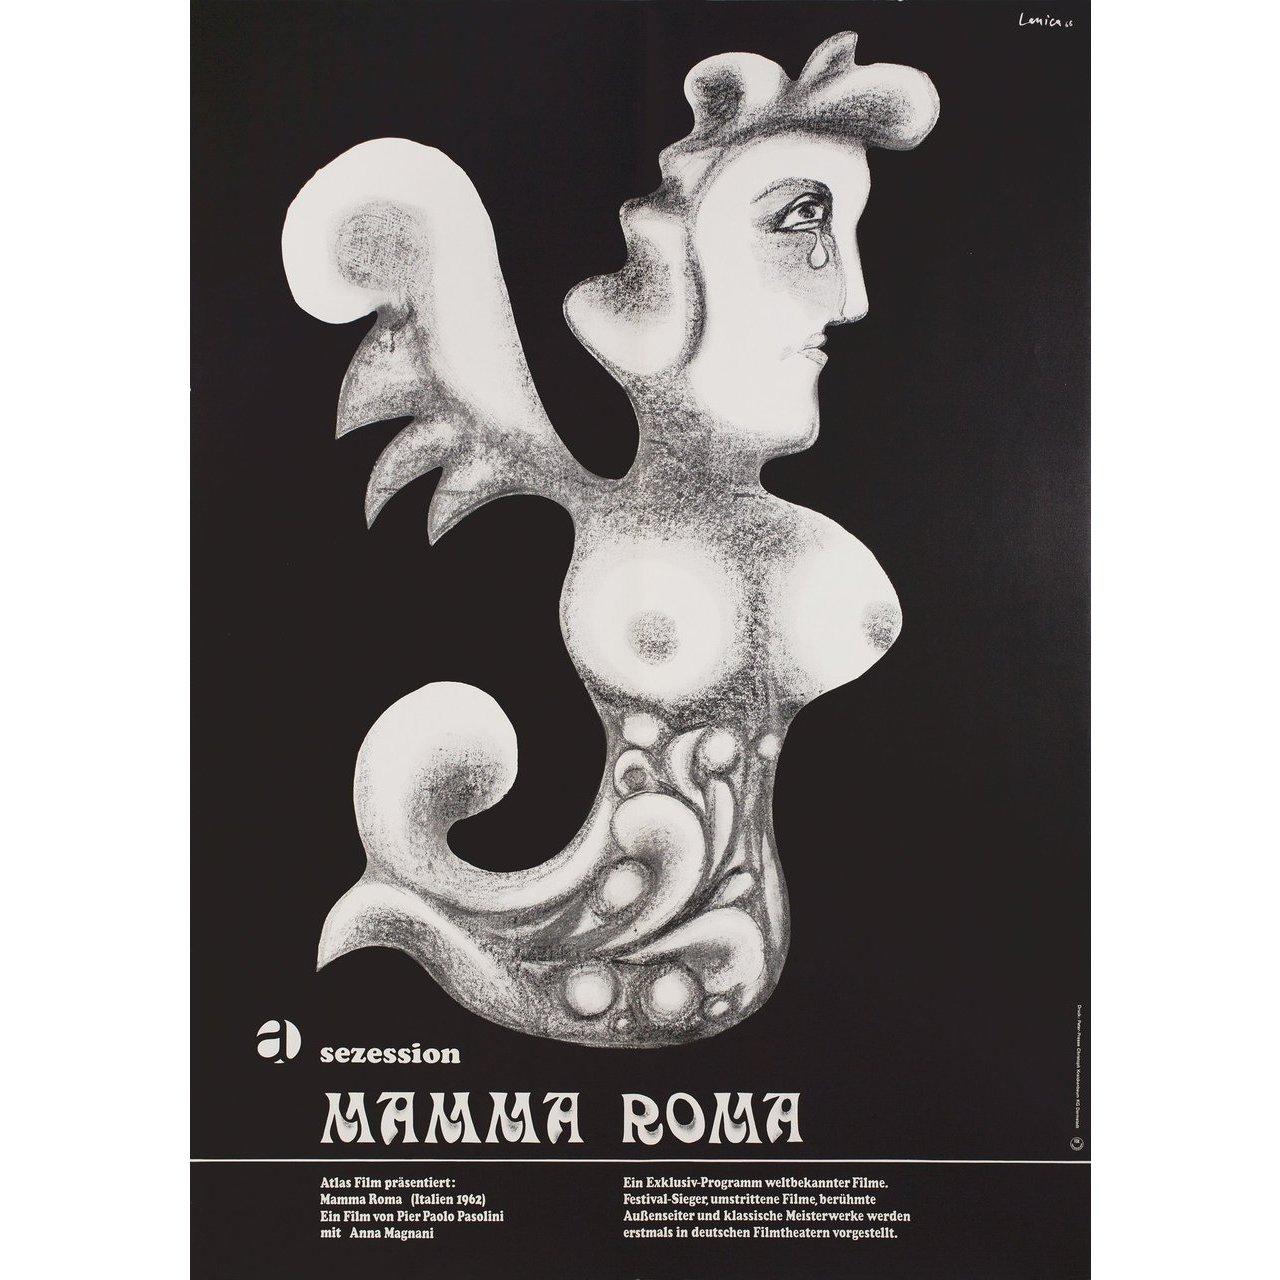 Original 1965 German A1 poster by Jan Lenica for the first German theatrical release of the 1962 film Mamma Roma directed by Pier Paolo Pasolini with Anna Magnani / Ettore Garofolo / Franco Citti / Silvana Corsini. Very Good-Fine condition, rolled.